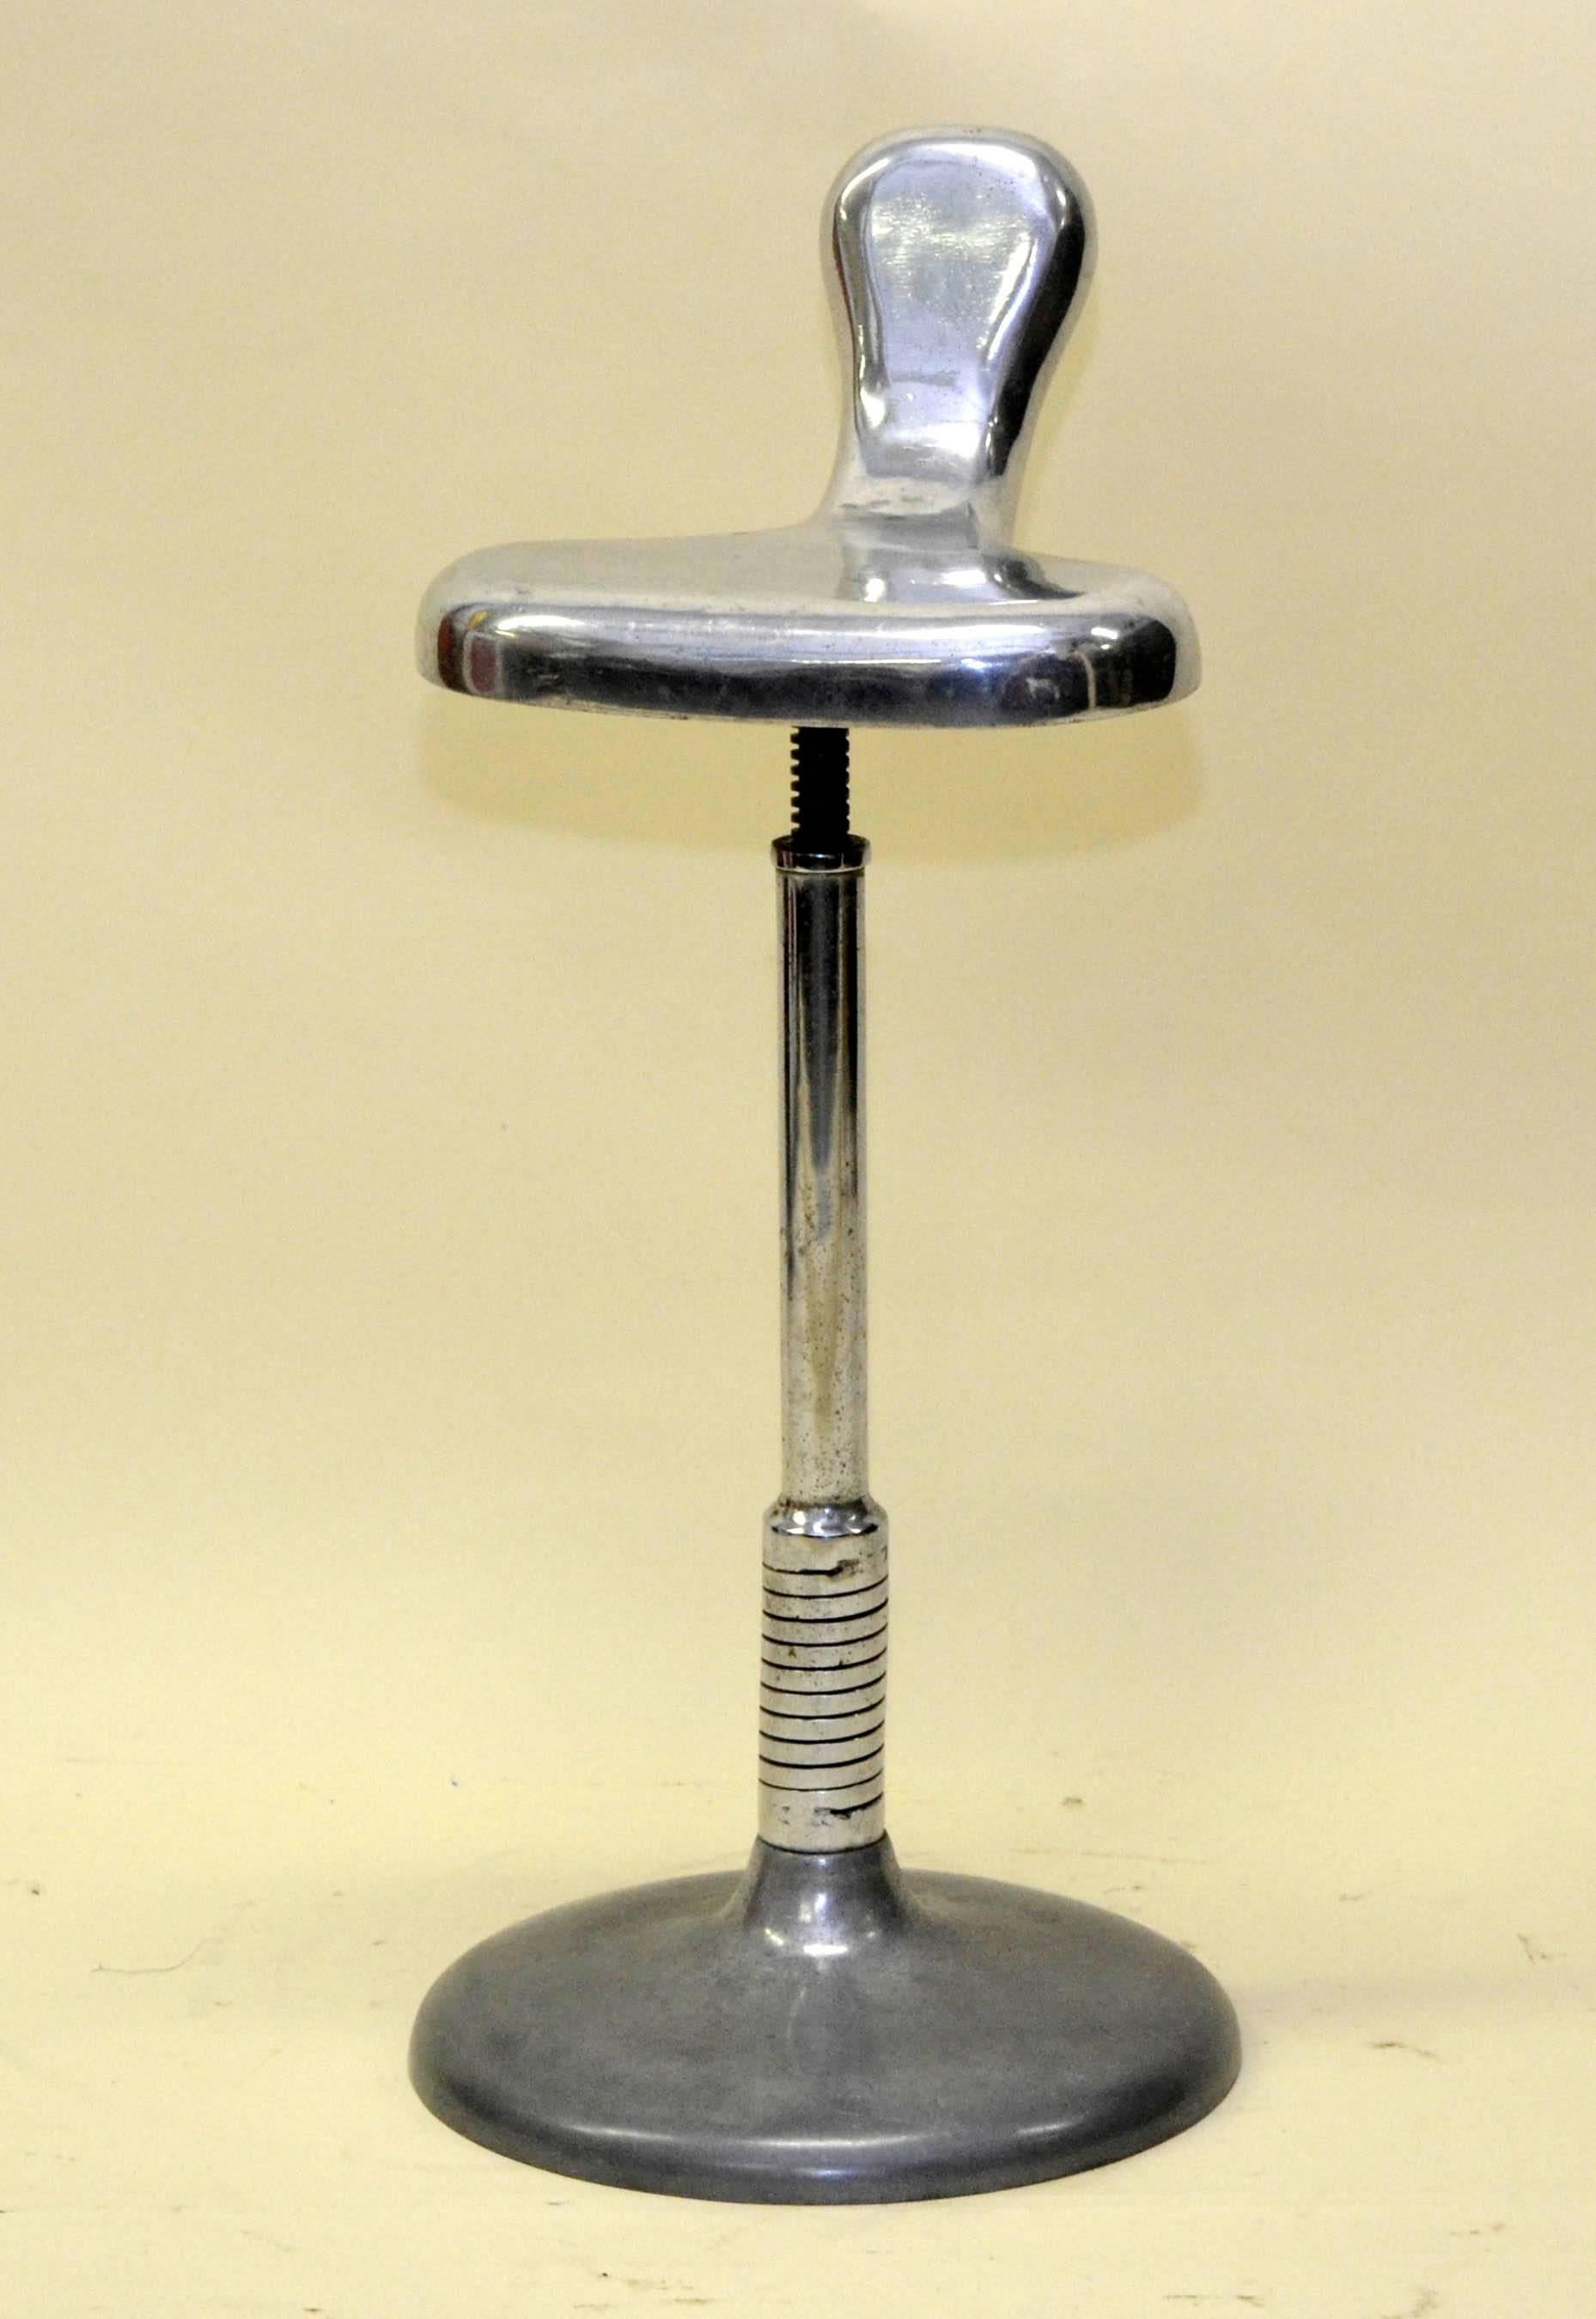 A beautiful 1950s Italian vintage Industrial steel dentists stool. With a unusual polished cast iron base, sprung upright mechanism. The stool offered precision support at various angles while the dentist was at work.